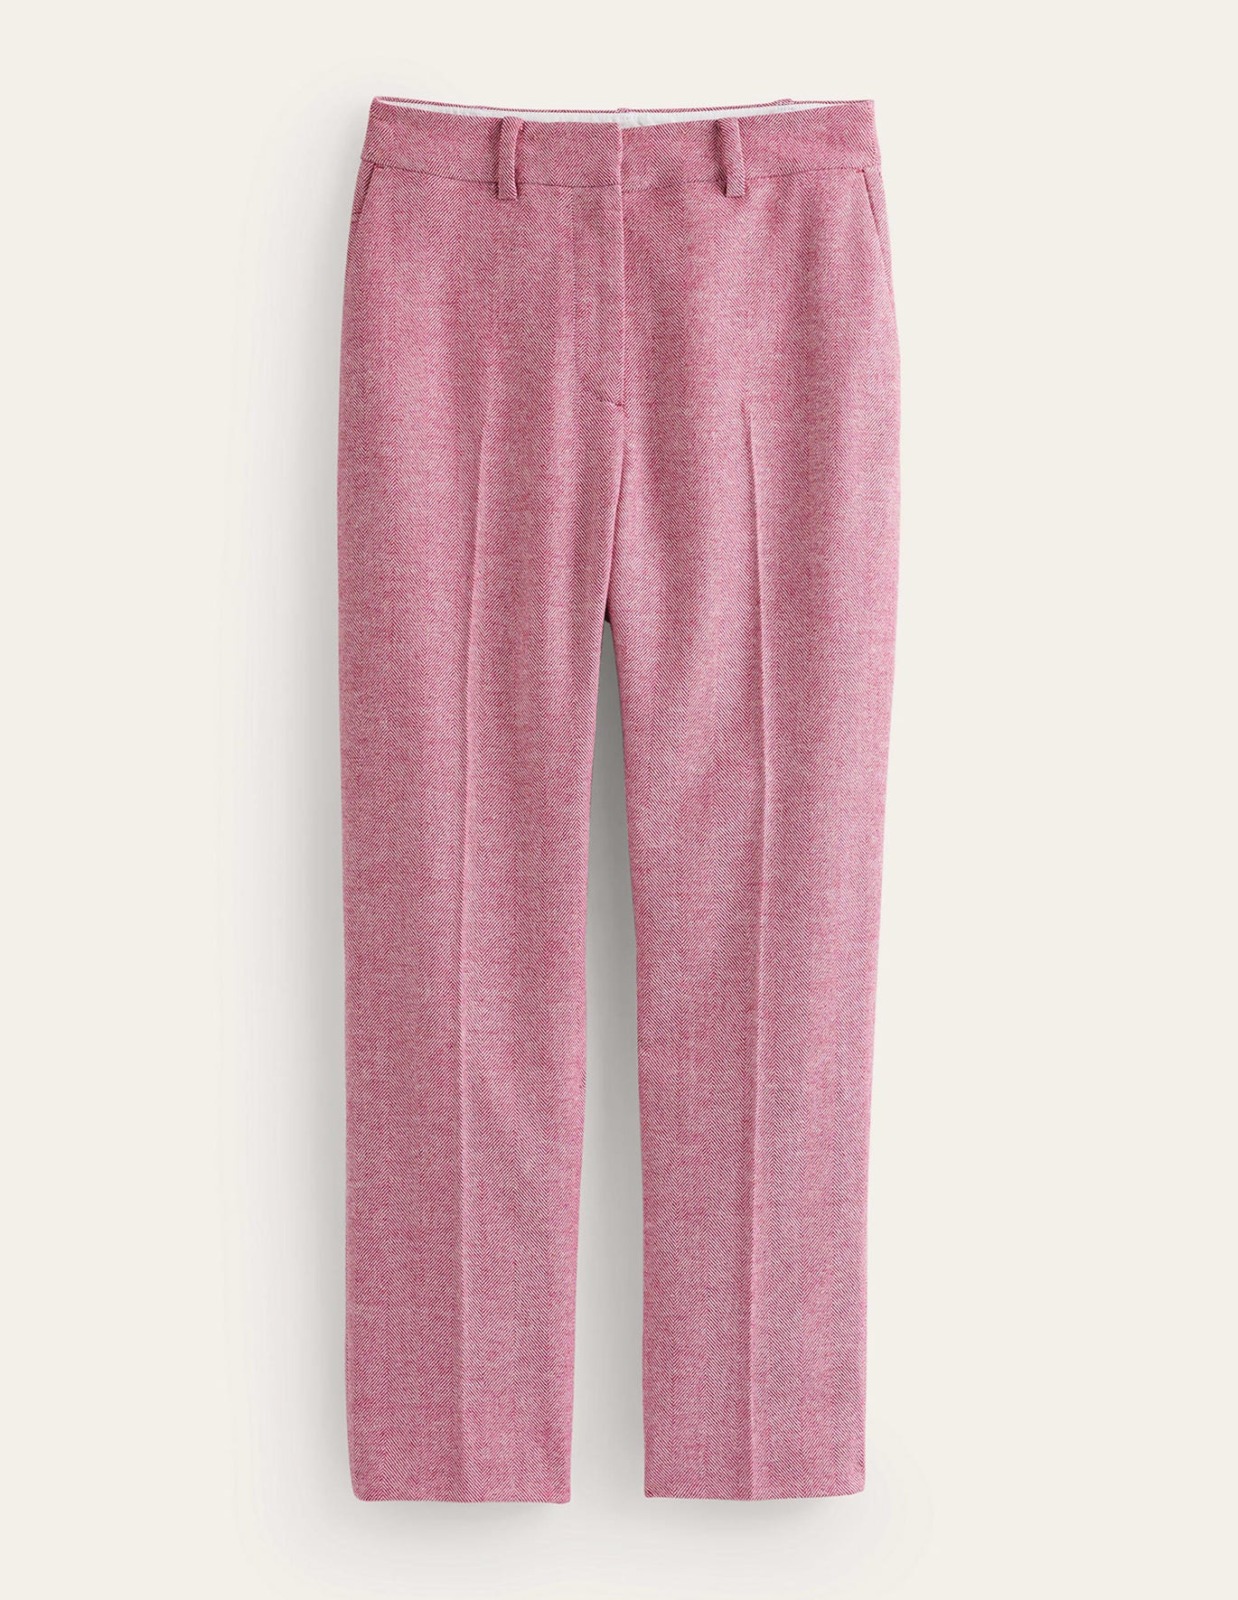 Womens Pink Trousers by Boden GOOFASH